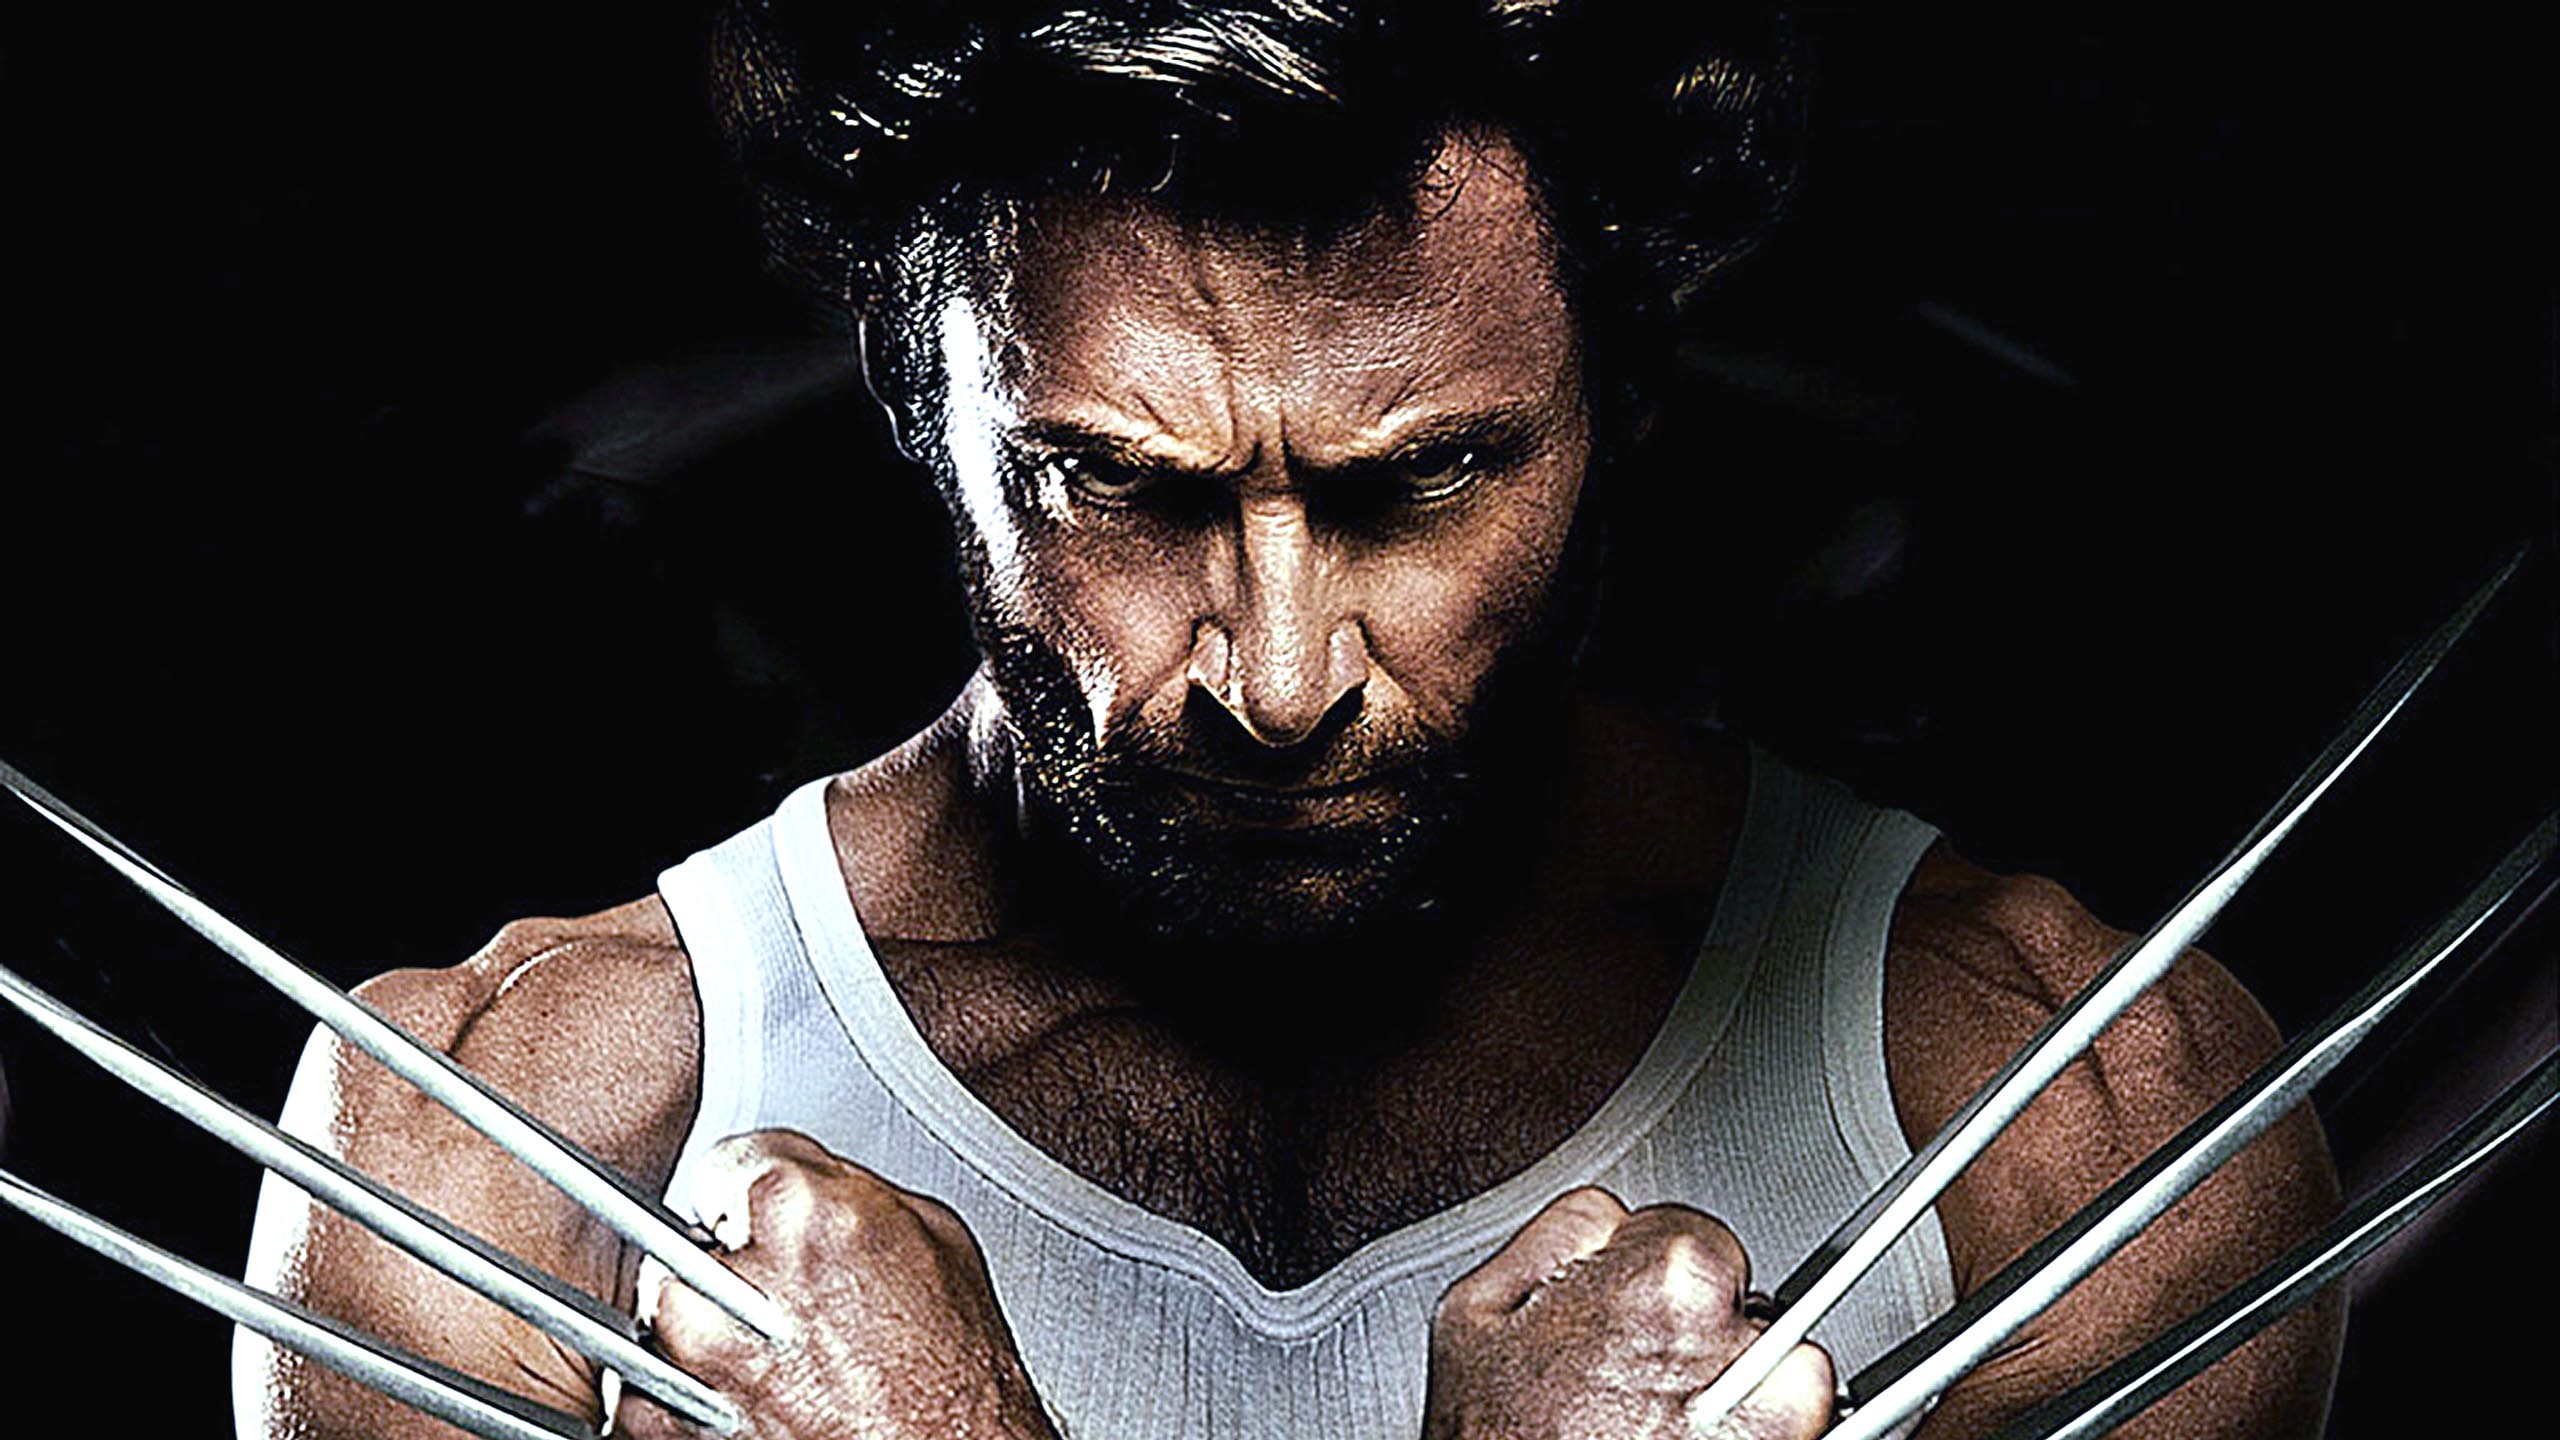 2560x1440 ... Images of Wolverine Hd Wallpaper 1366x768 - #SC ...